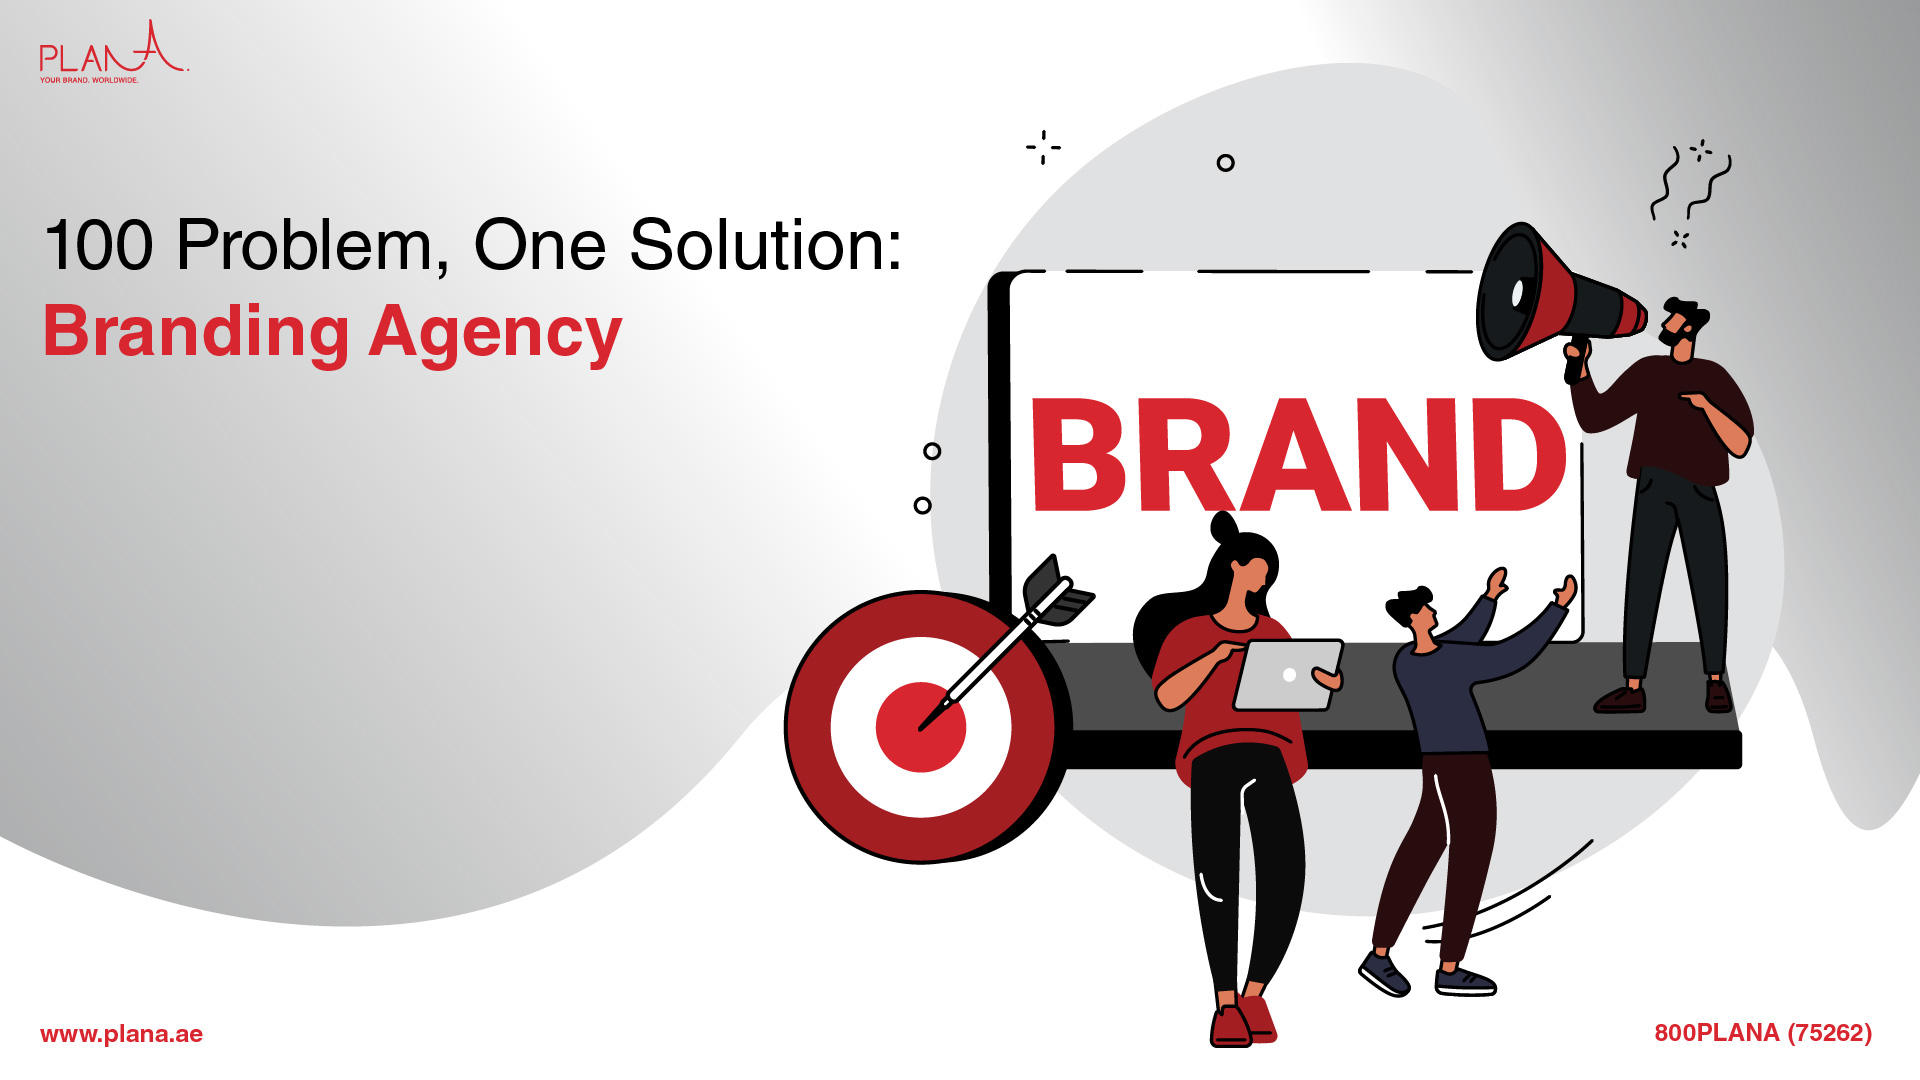 100 Problems, One Solution: Branding Agency